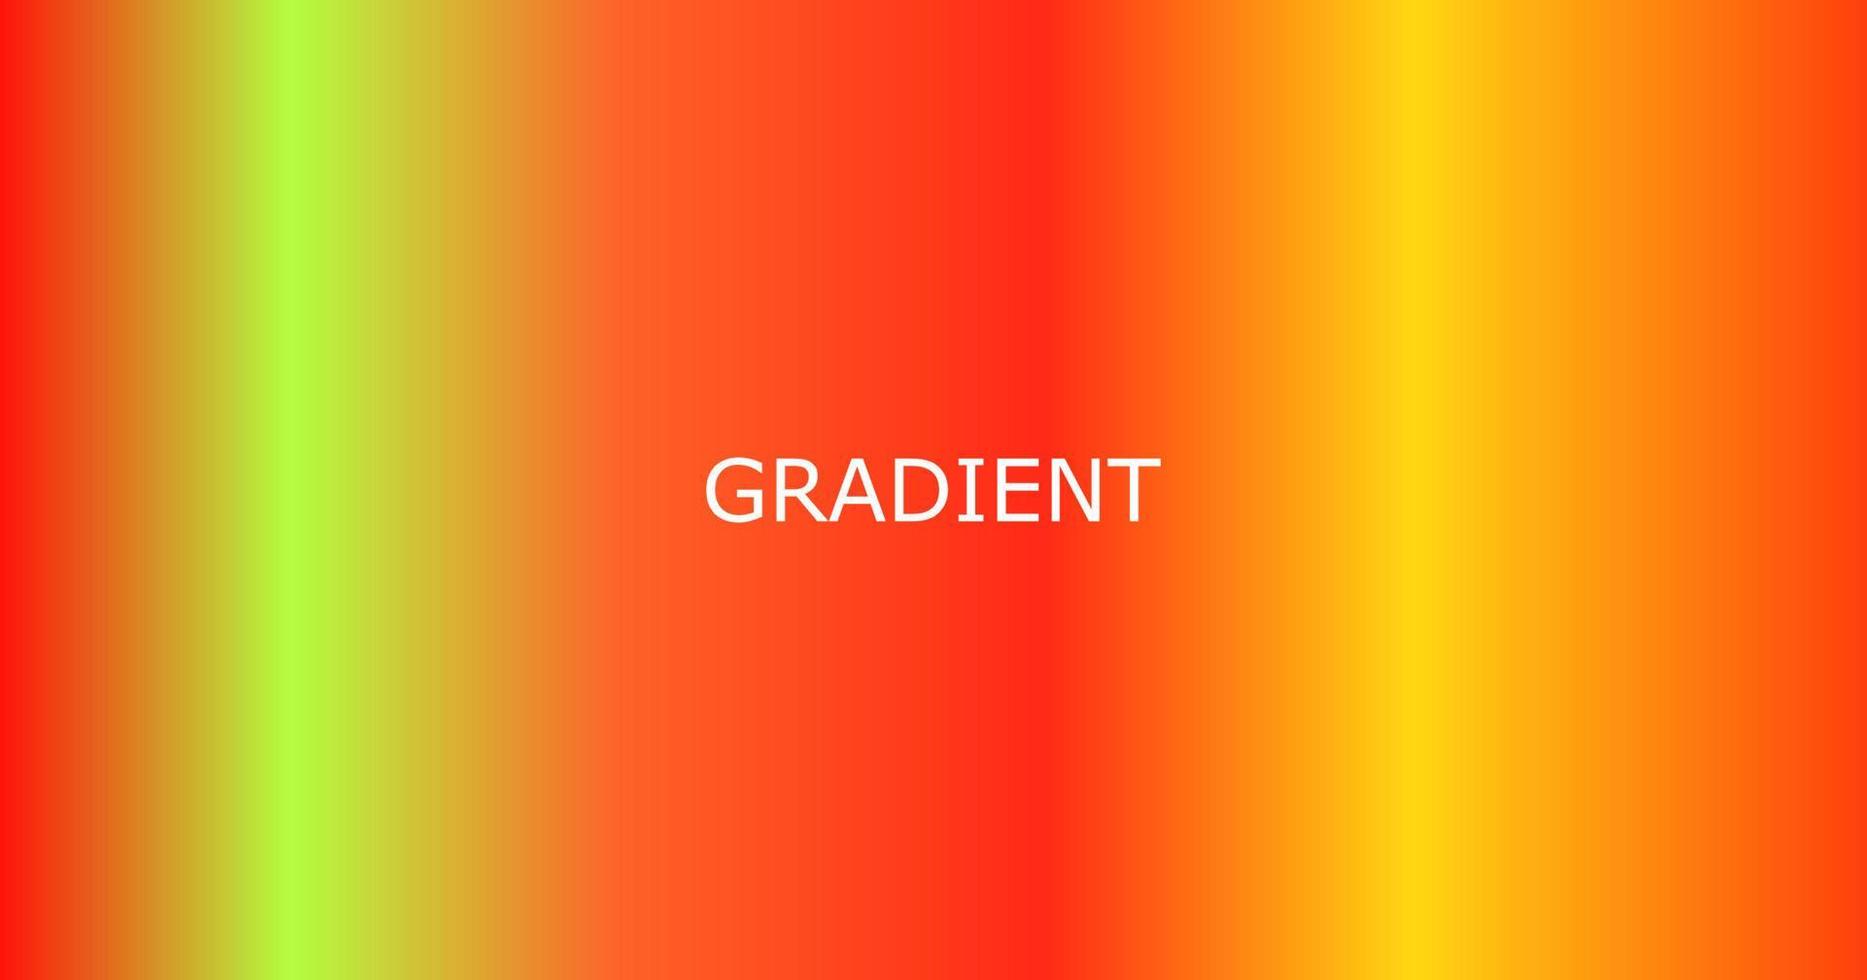 Free colorfull gradient download file eps vector